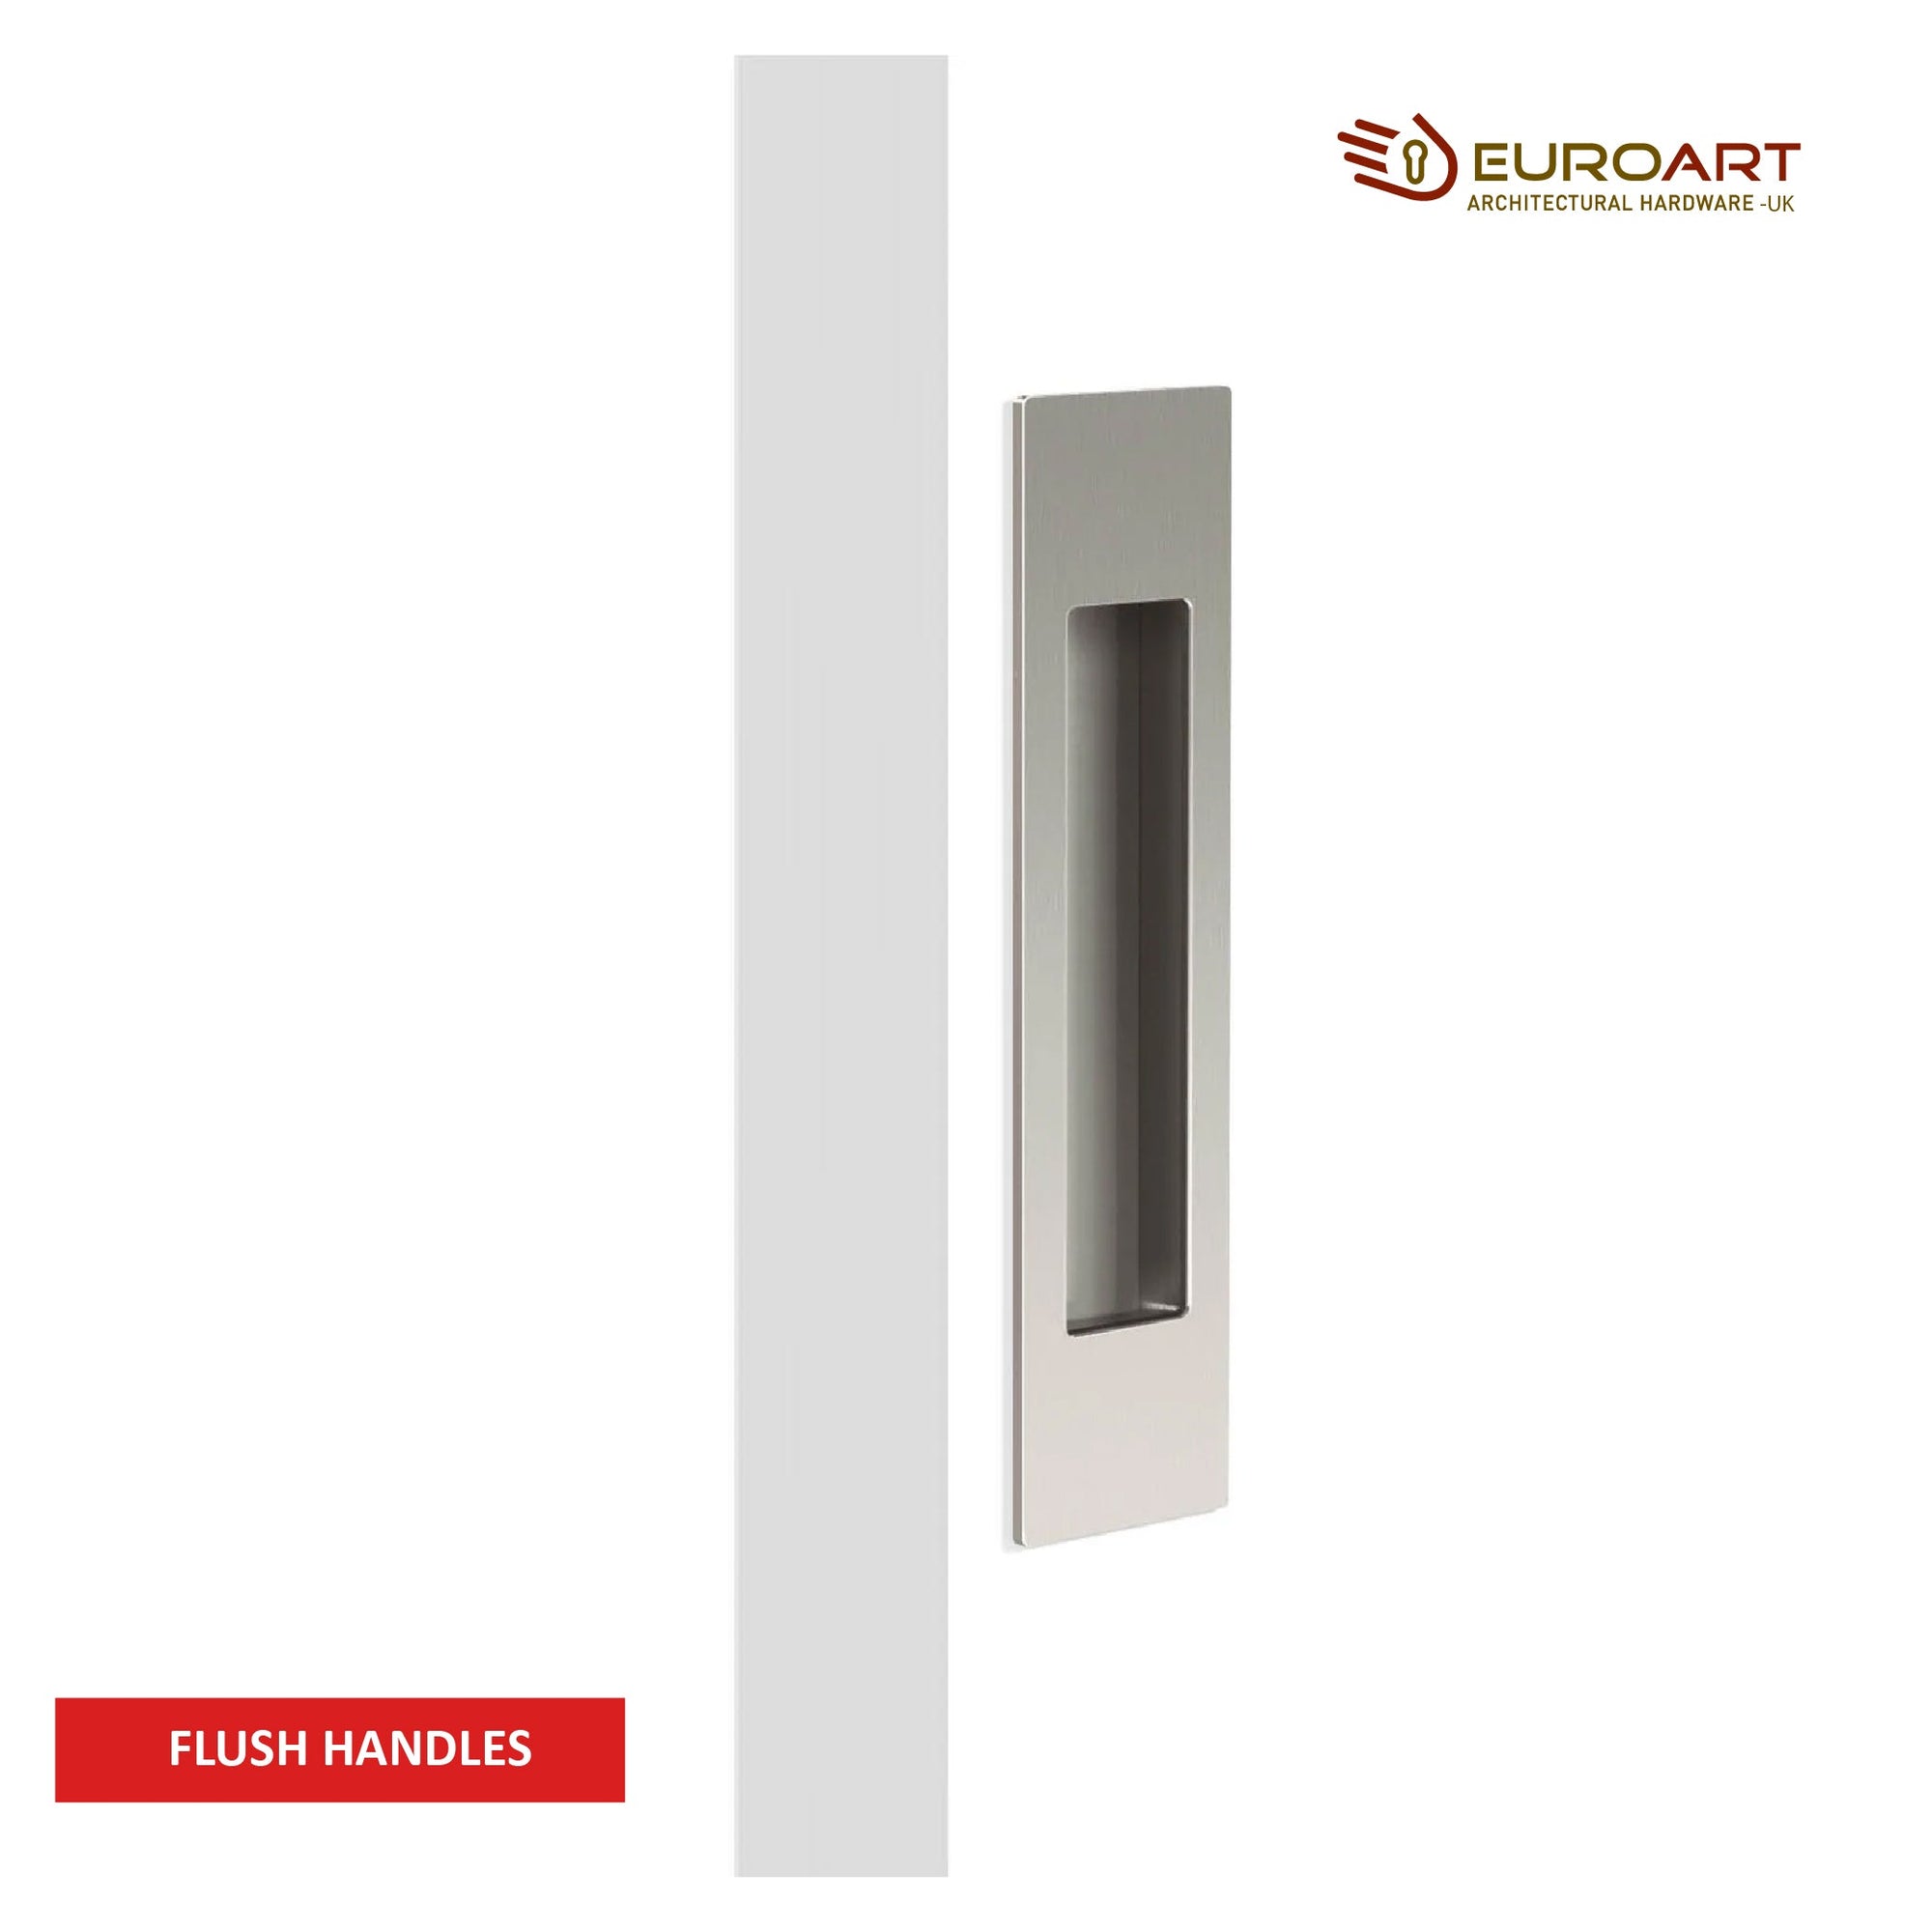 EuroArt Flush Handles - Enhance your doors and cabinets with sleek and modern designs - M. M. Noorbhoy & Co